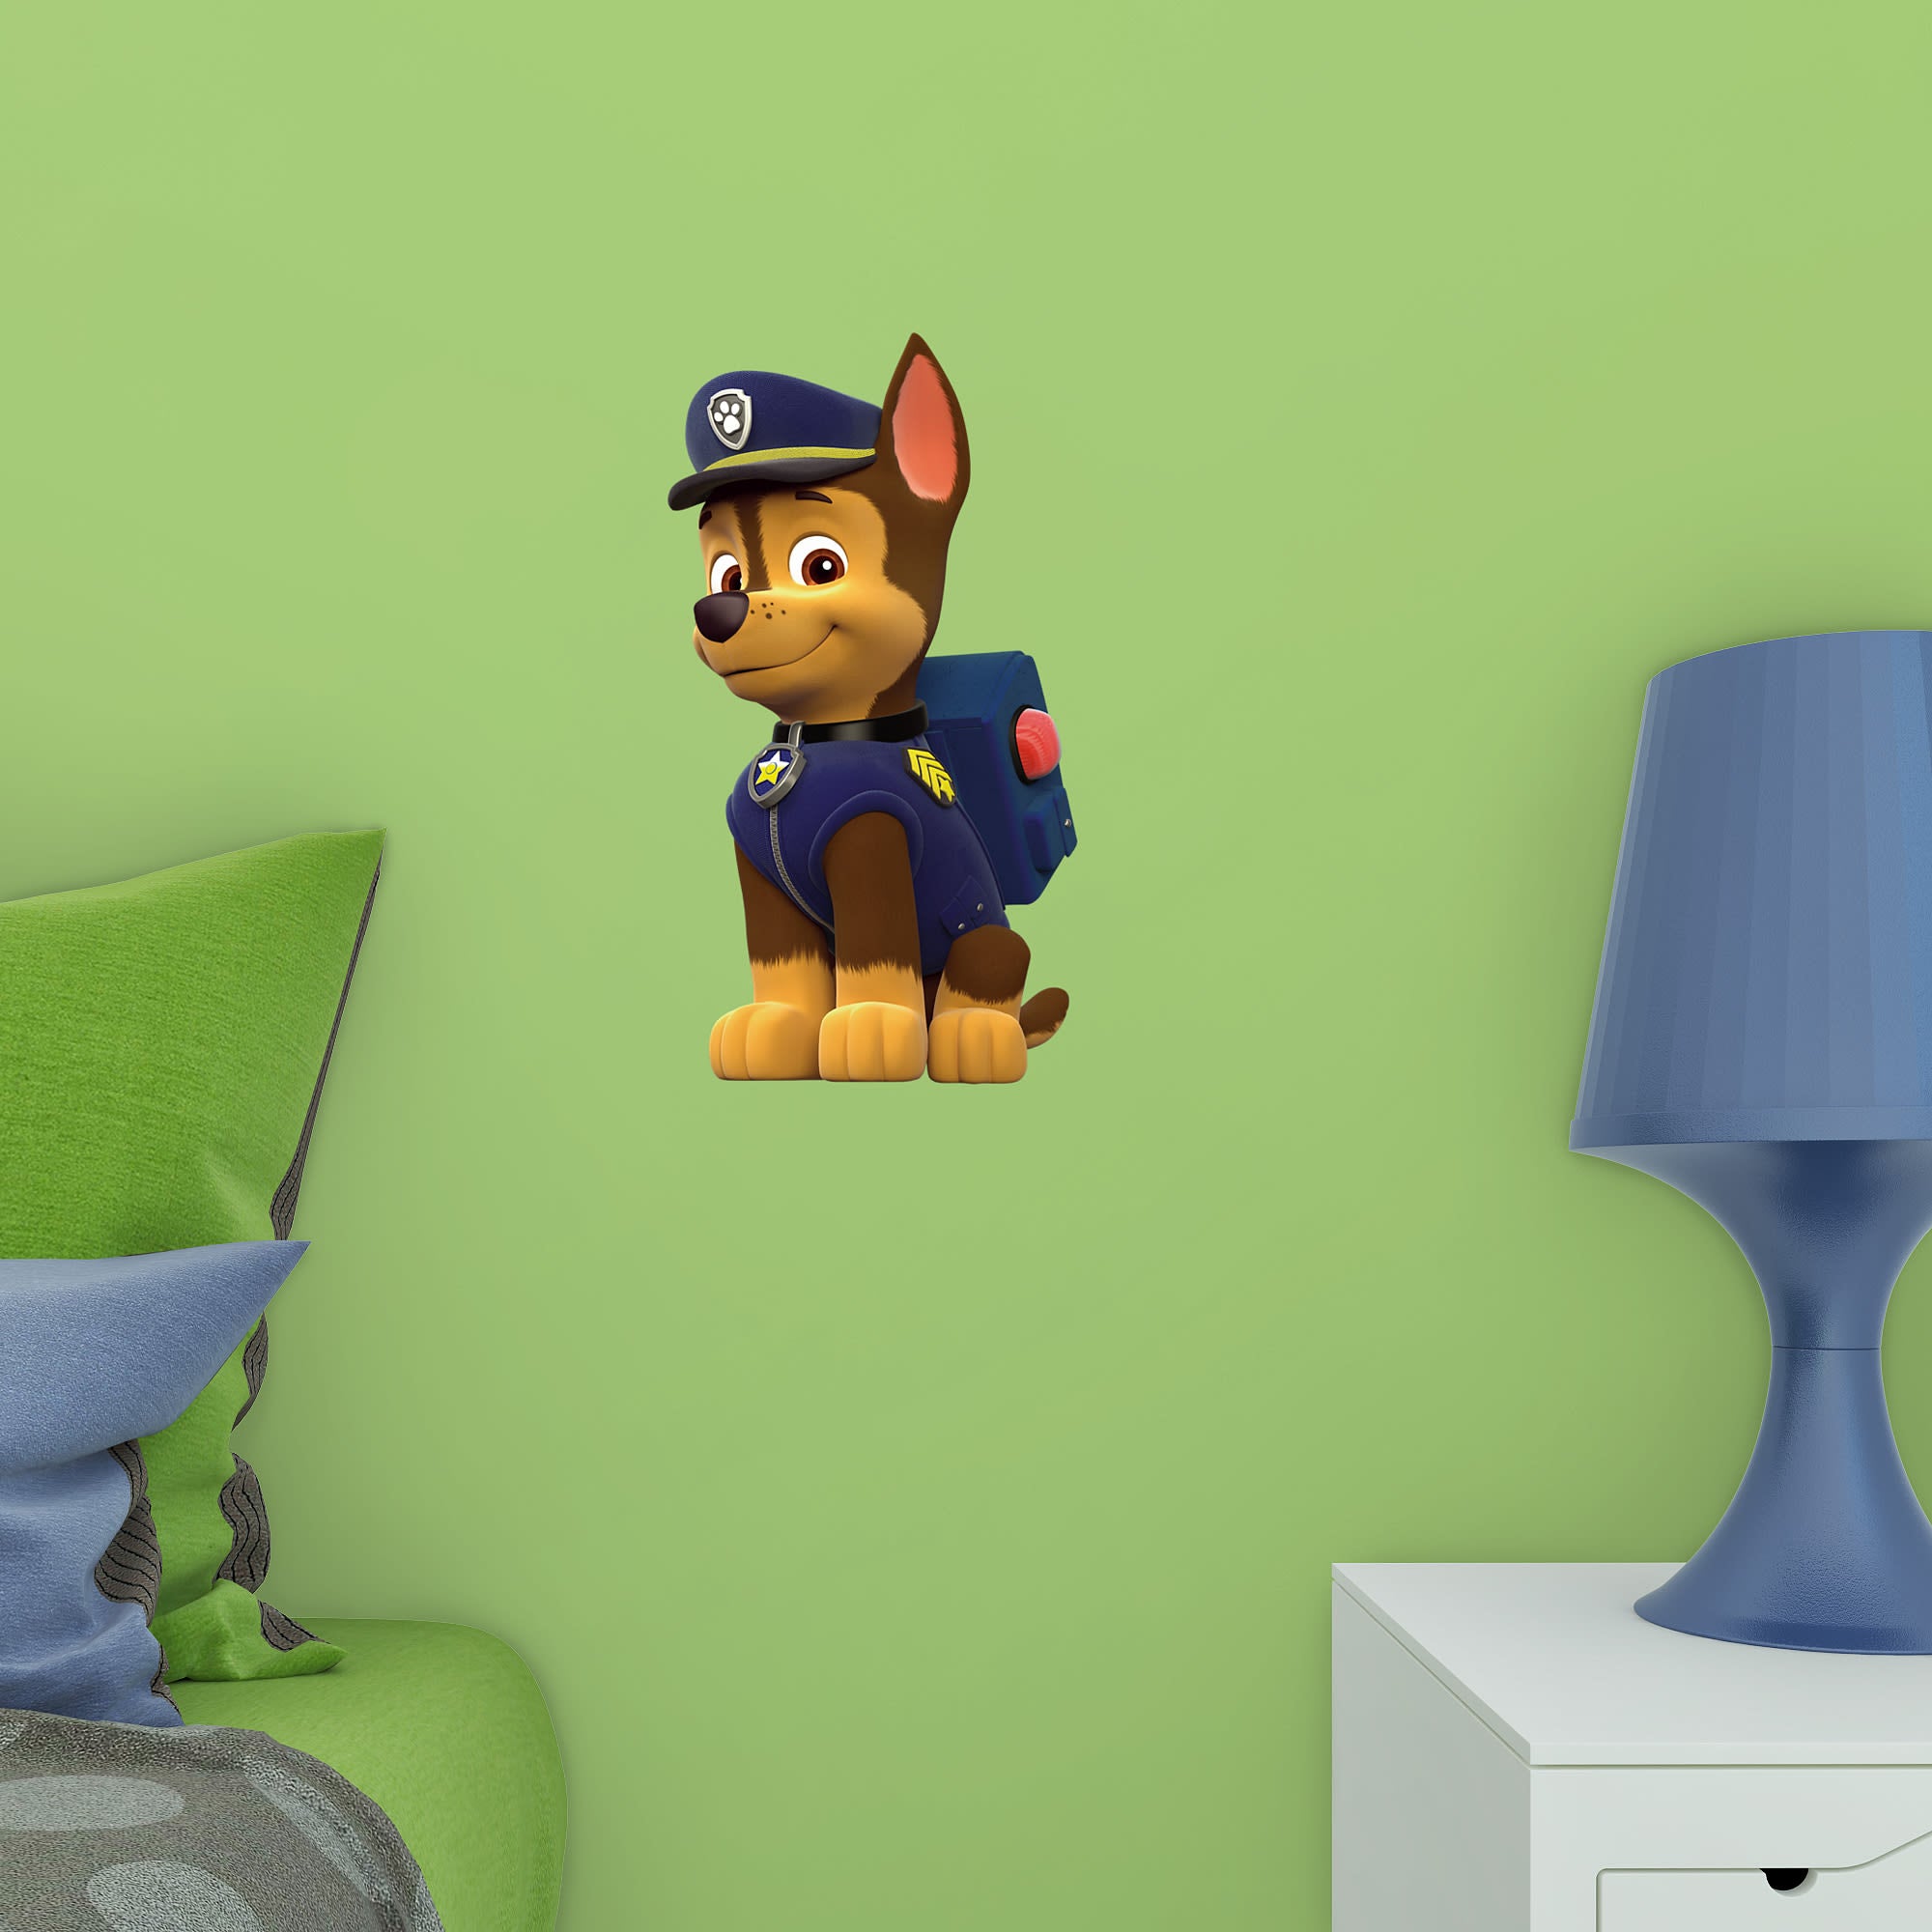 Chase - Officially Licensed PAW Patrol Removable Wall Decal 9.0"W x 16.0"H by Fathead | Vinyl